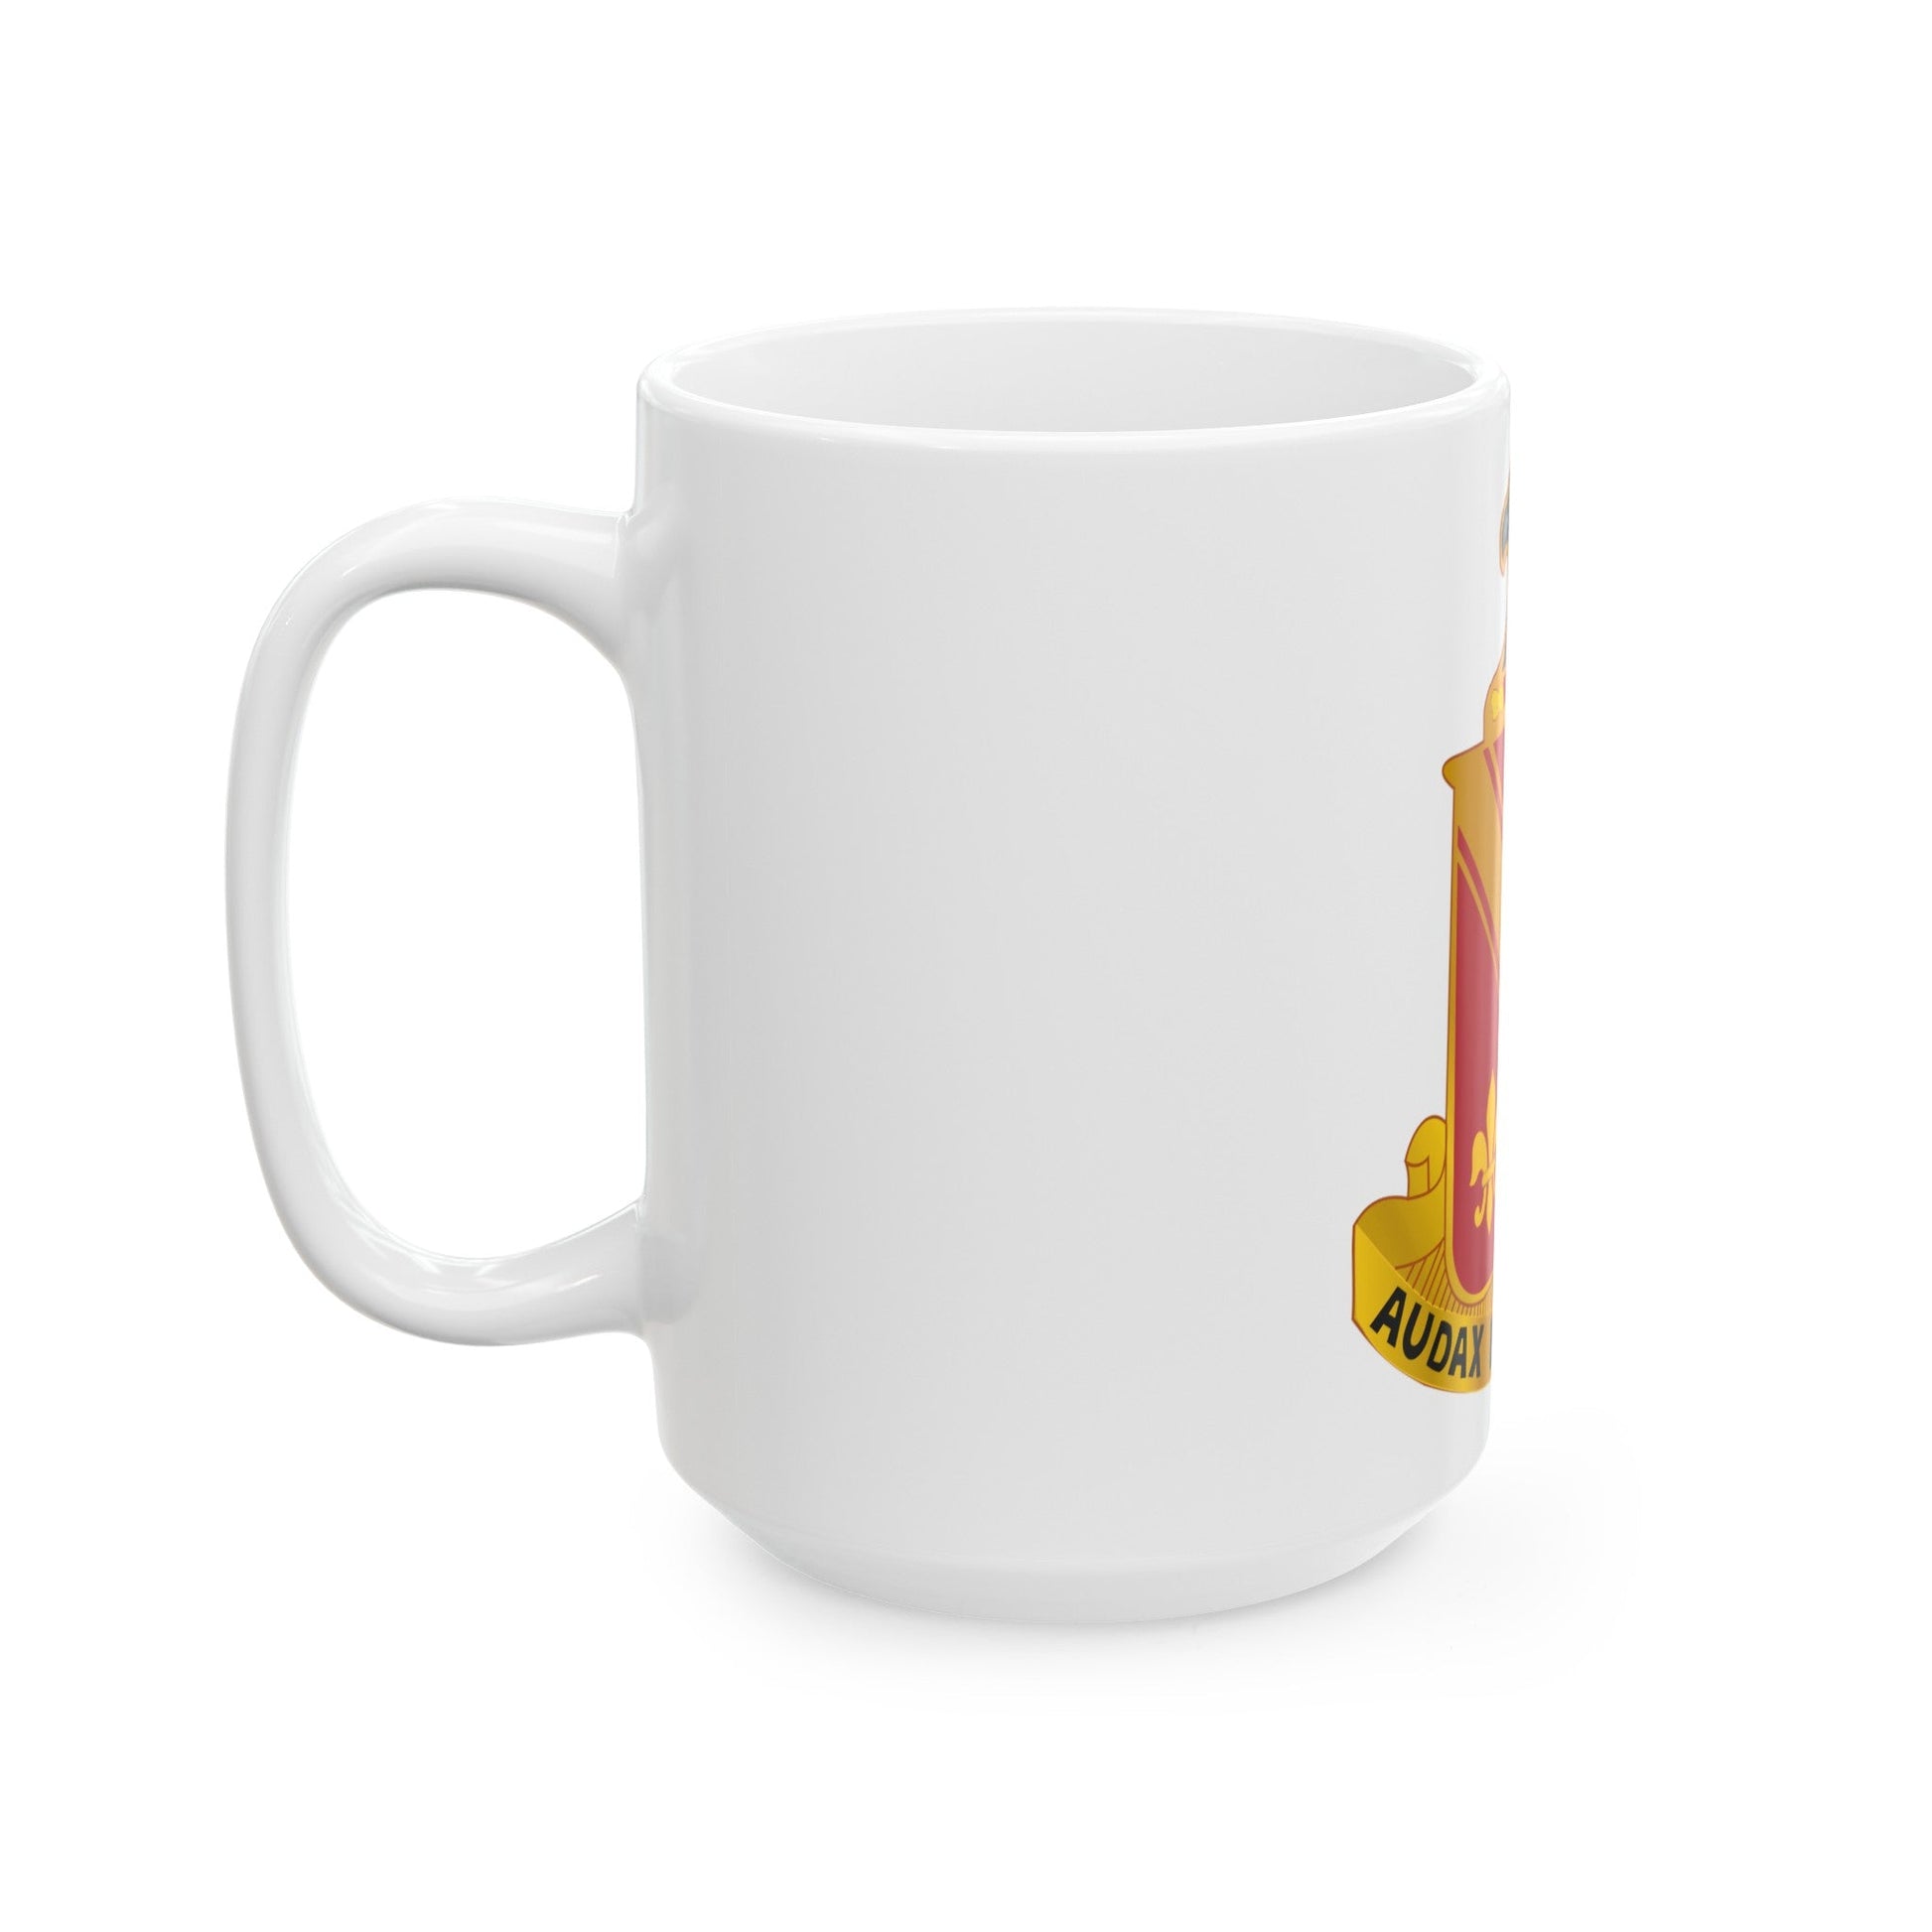 11 Antiaircraft Artillery Missile Battalion (U.S. Army) White Coffee Mug-The Sticker Space